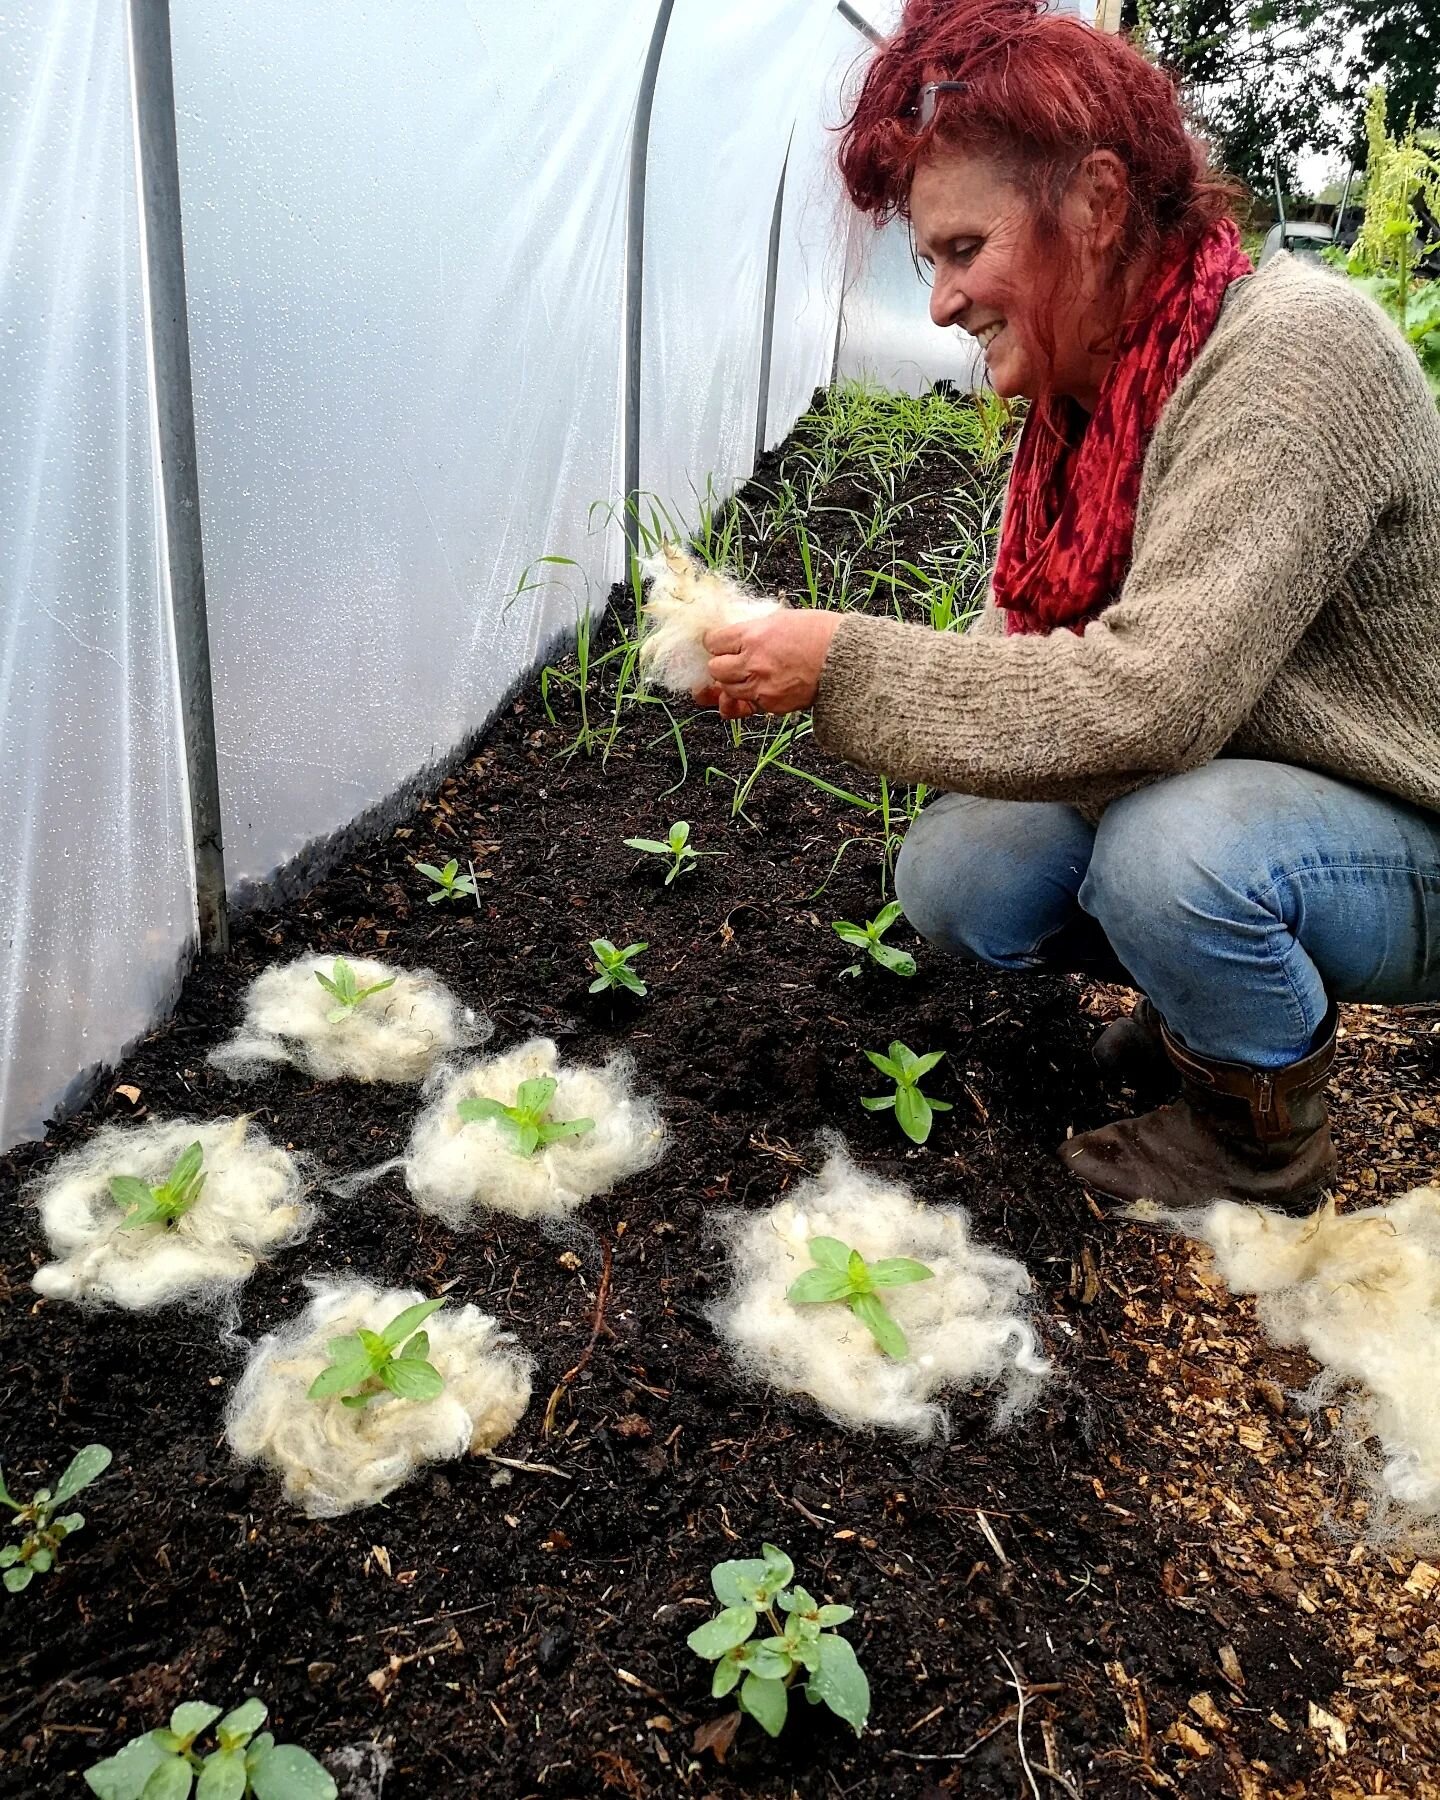 Experimenting with some fleece slug protection!

Our small tunnel is up and beds made with our homemade compost which is gurt lush and full of critters. Sadly this also includes a few slugs!

So we are experimenting this year is with some sheep fleec